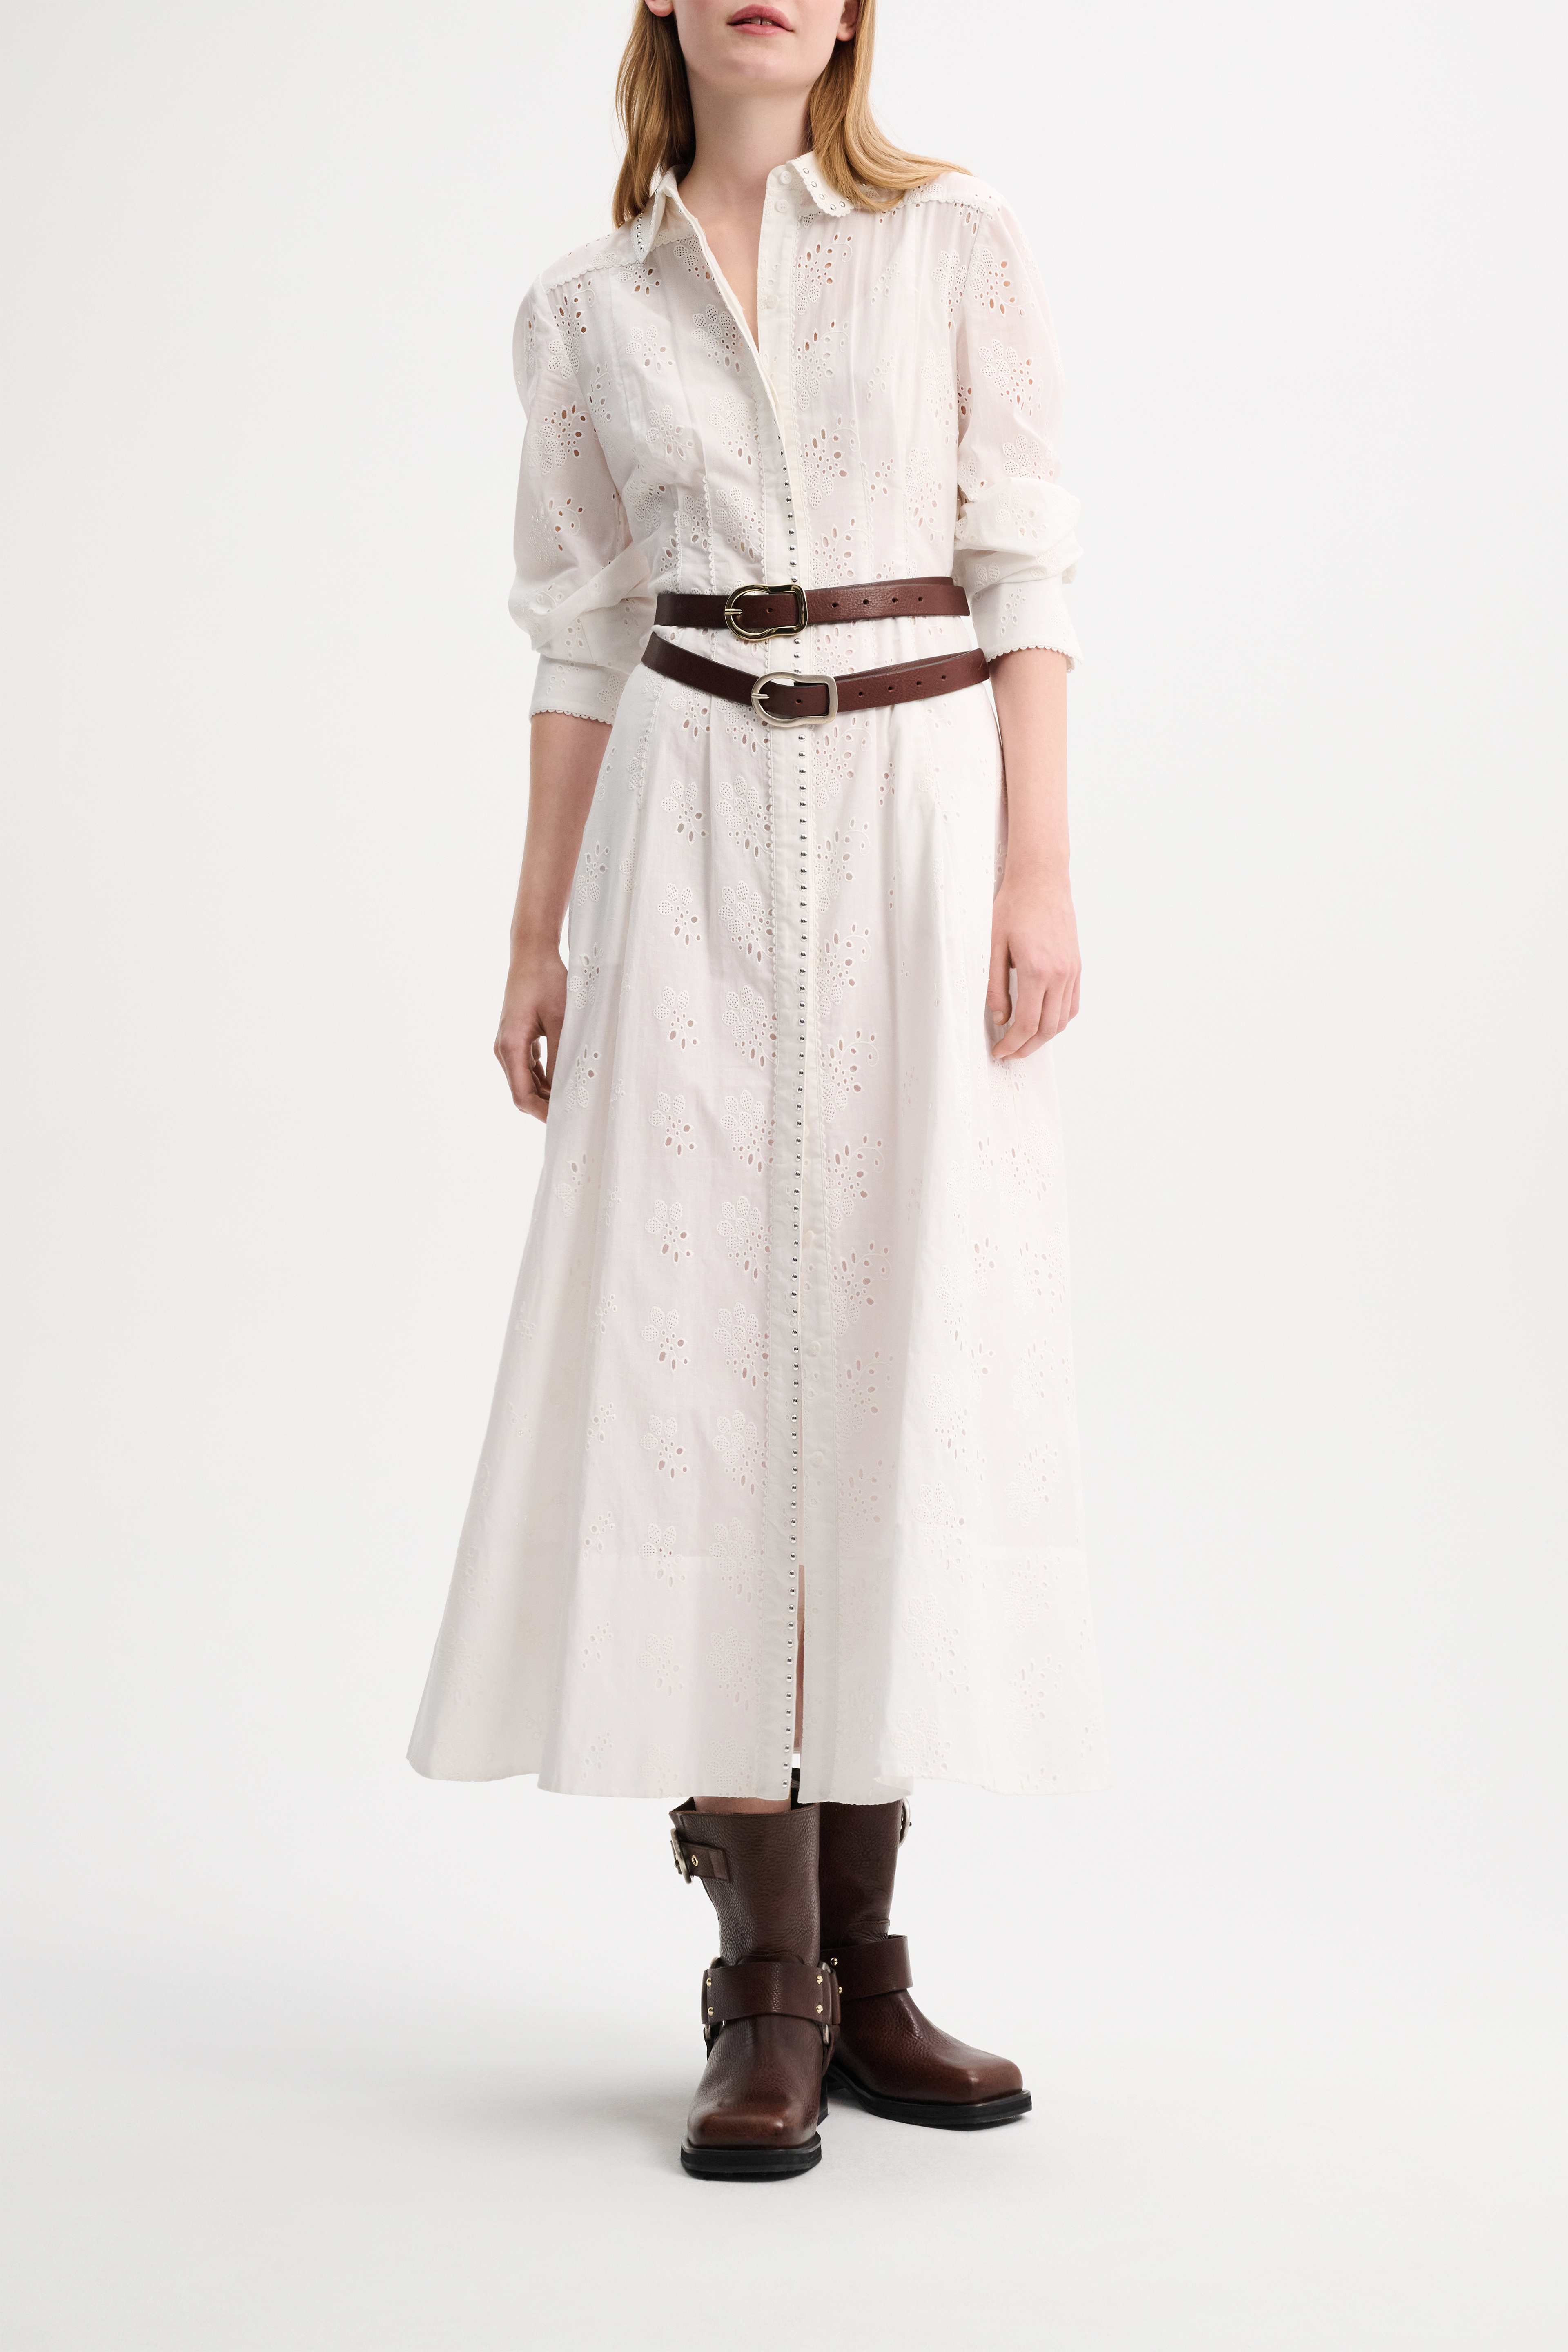 Dorothee Schumacher Shirtdress in broderie anglaise with